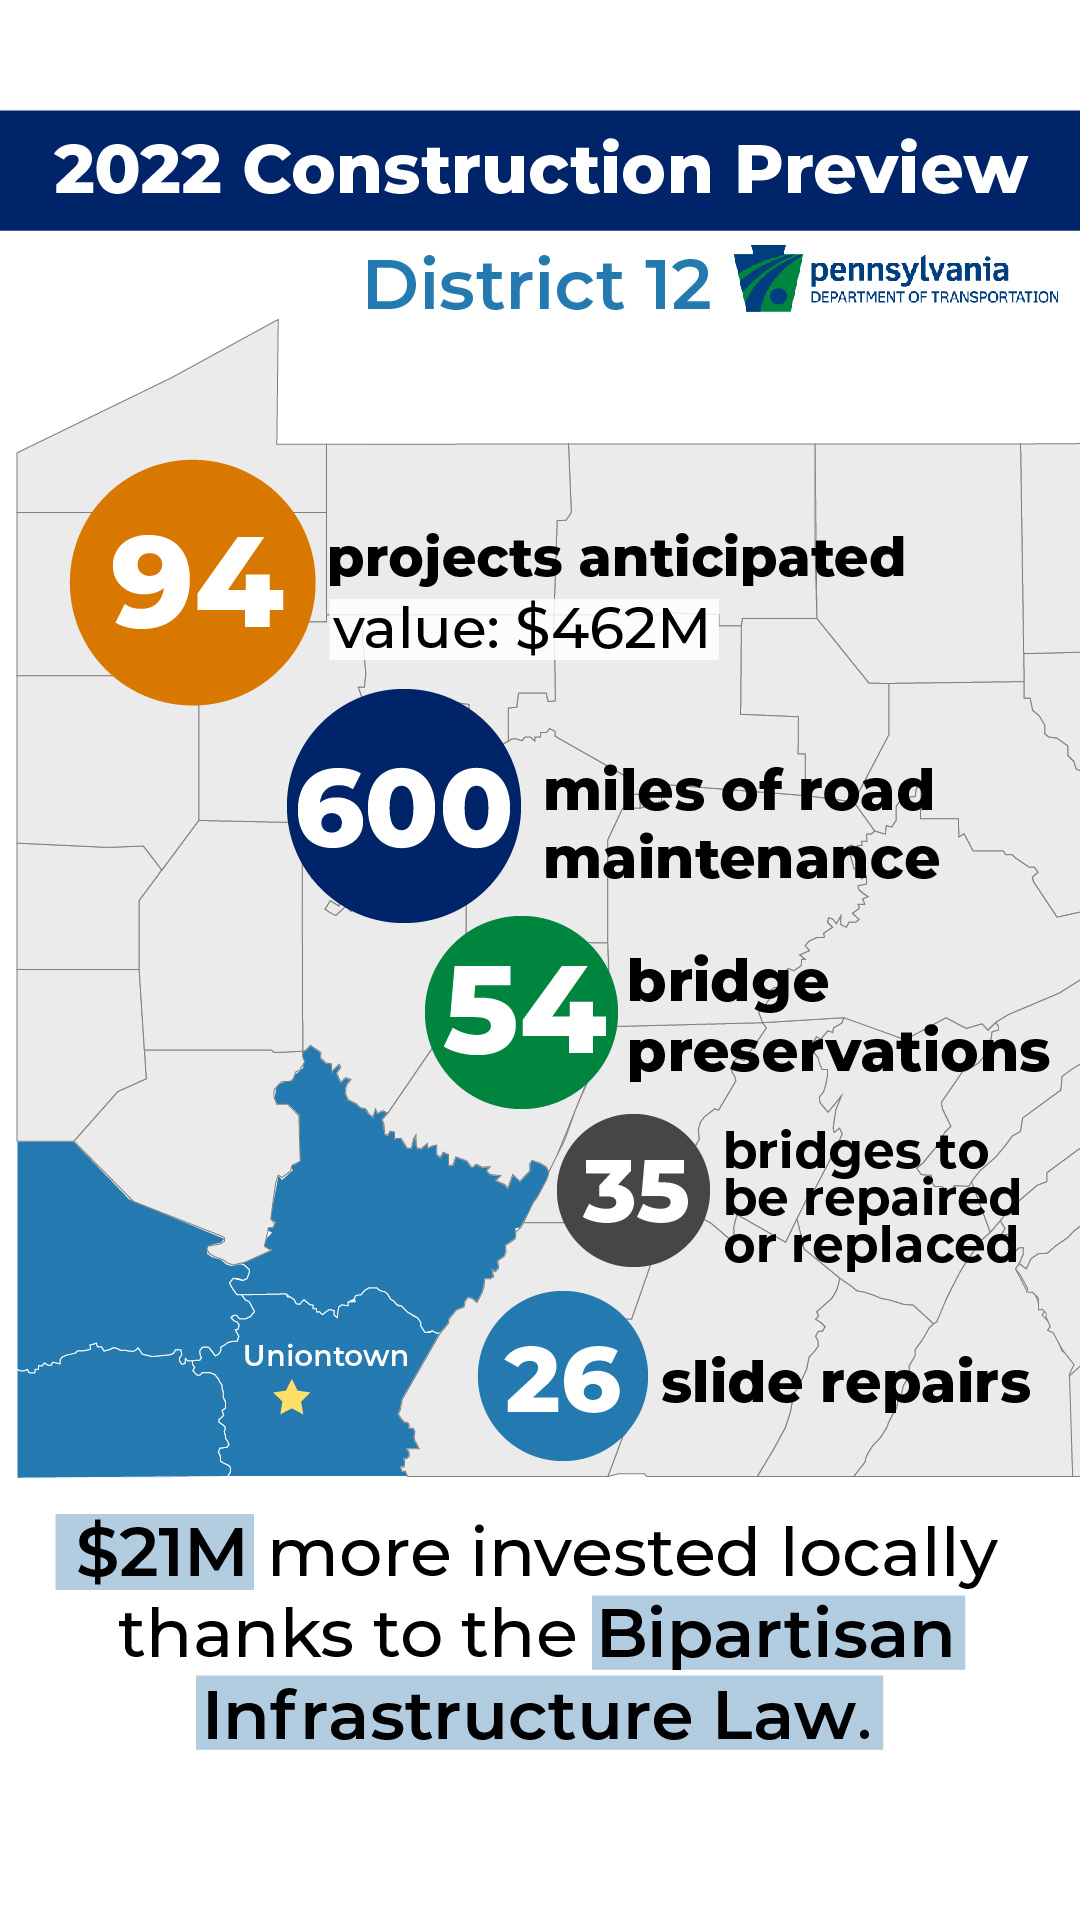 In PennDOT's District 12, we anticipate 94 projects in 2022 with a $462 million value. Also expect 600 miles of resurfacing, 26 slide repairs and 54 bridge projects. Thanks to the Bipartisan Infrastructure Law, $21 million more will be invested locally.